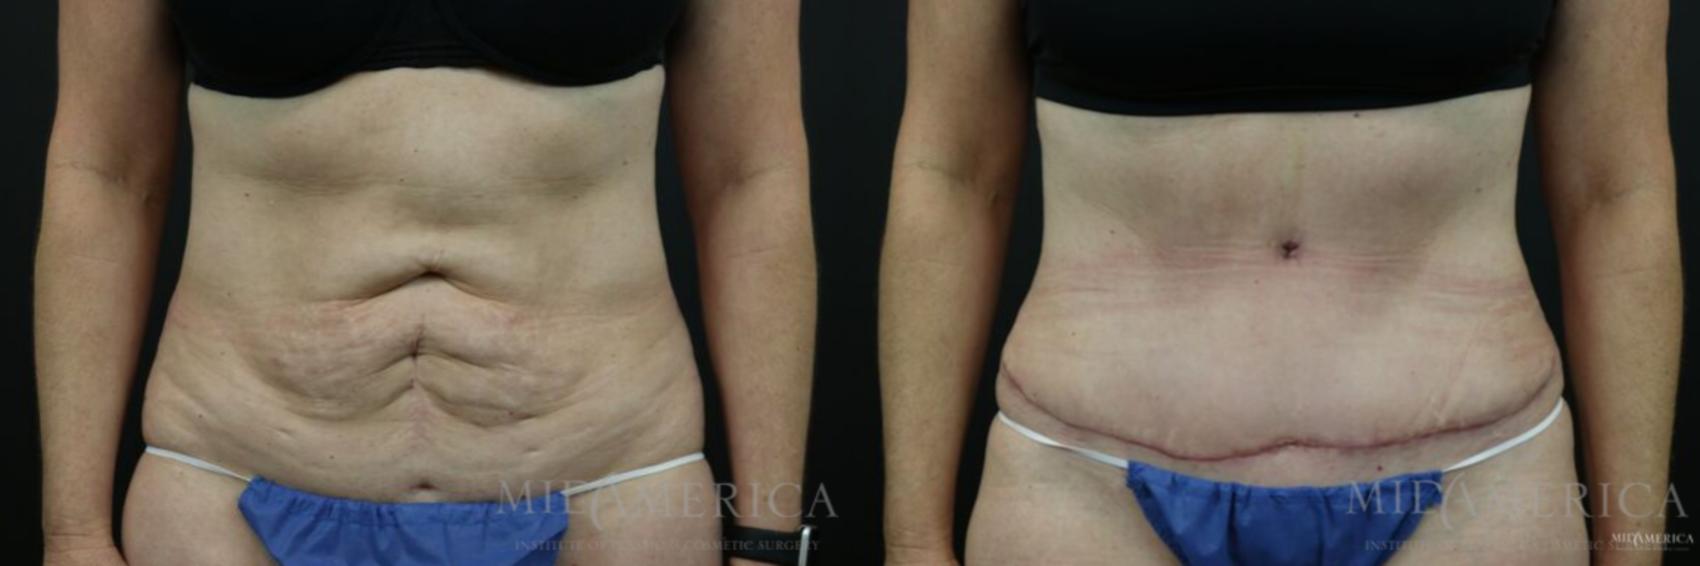 Patients Are Digging the Drainless Tummy Tuck